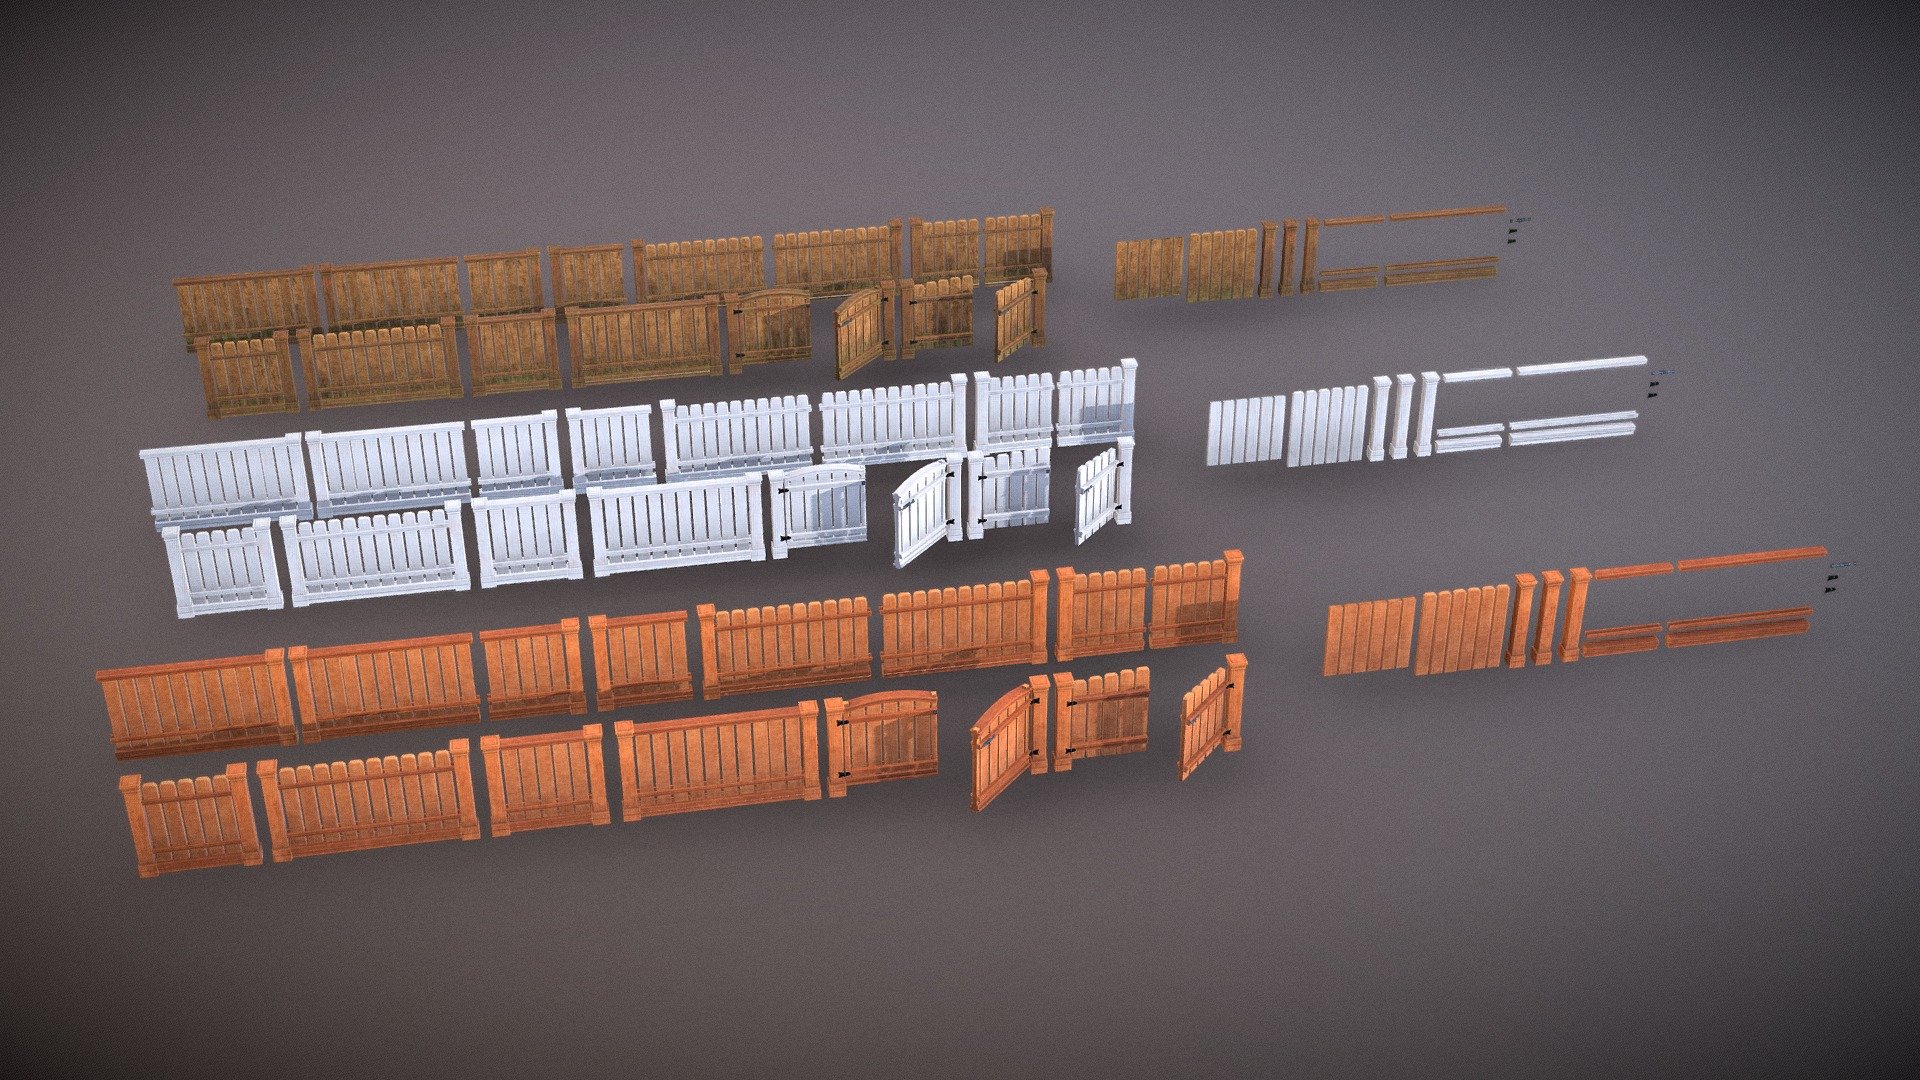 Hire me on Fiverr for custom game assets: https://bit.ly/FiverrAgustinHonnun

➥ Modular fences pack for any project.

➥ 6 (4k, 4096x4096) Materials. Fence x2 (Normal Fence), WFence x2 (White Fences) and OFence x2 (Old Fences) 3d model